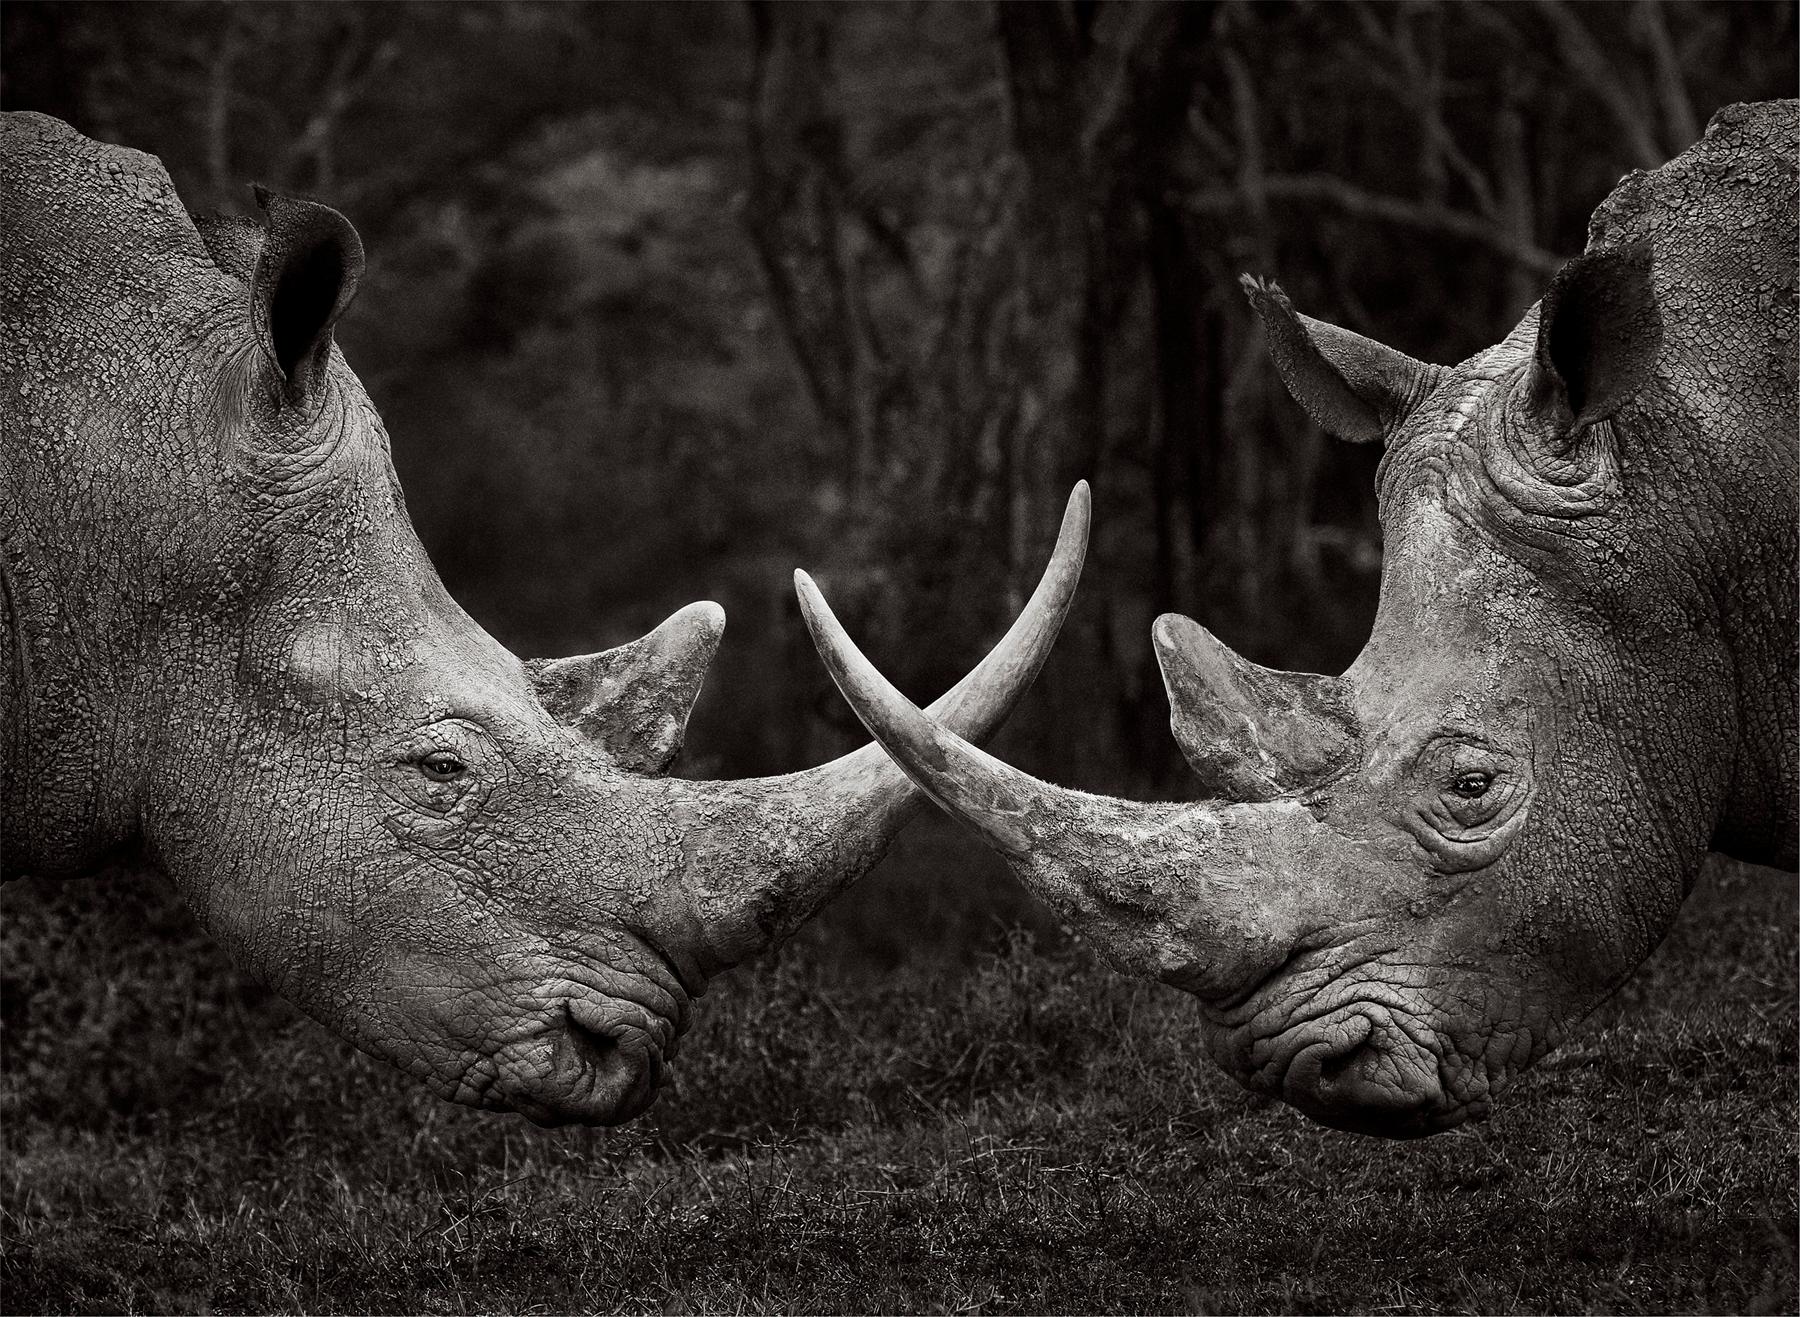 Drew Doggett Black and White Photograph - Design-inspired, incredible portrait of two rhinos with horns crossed at center 